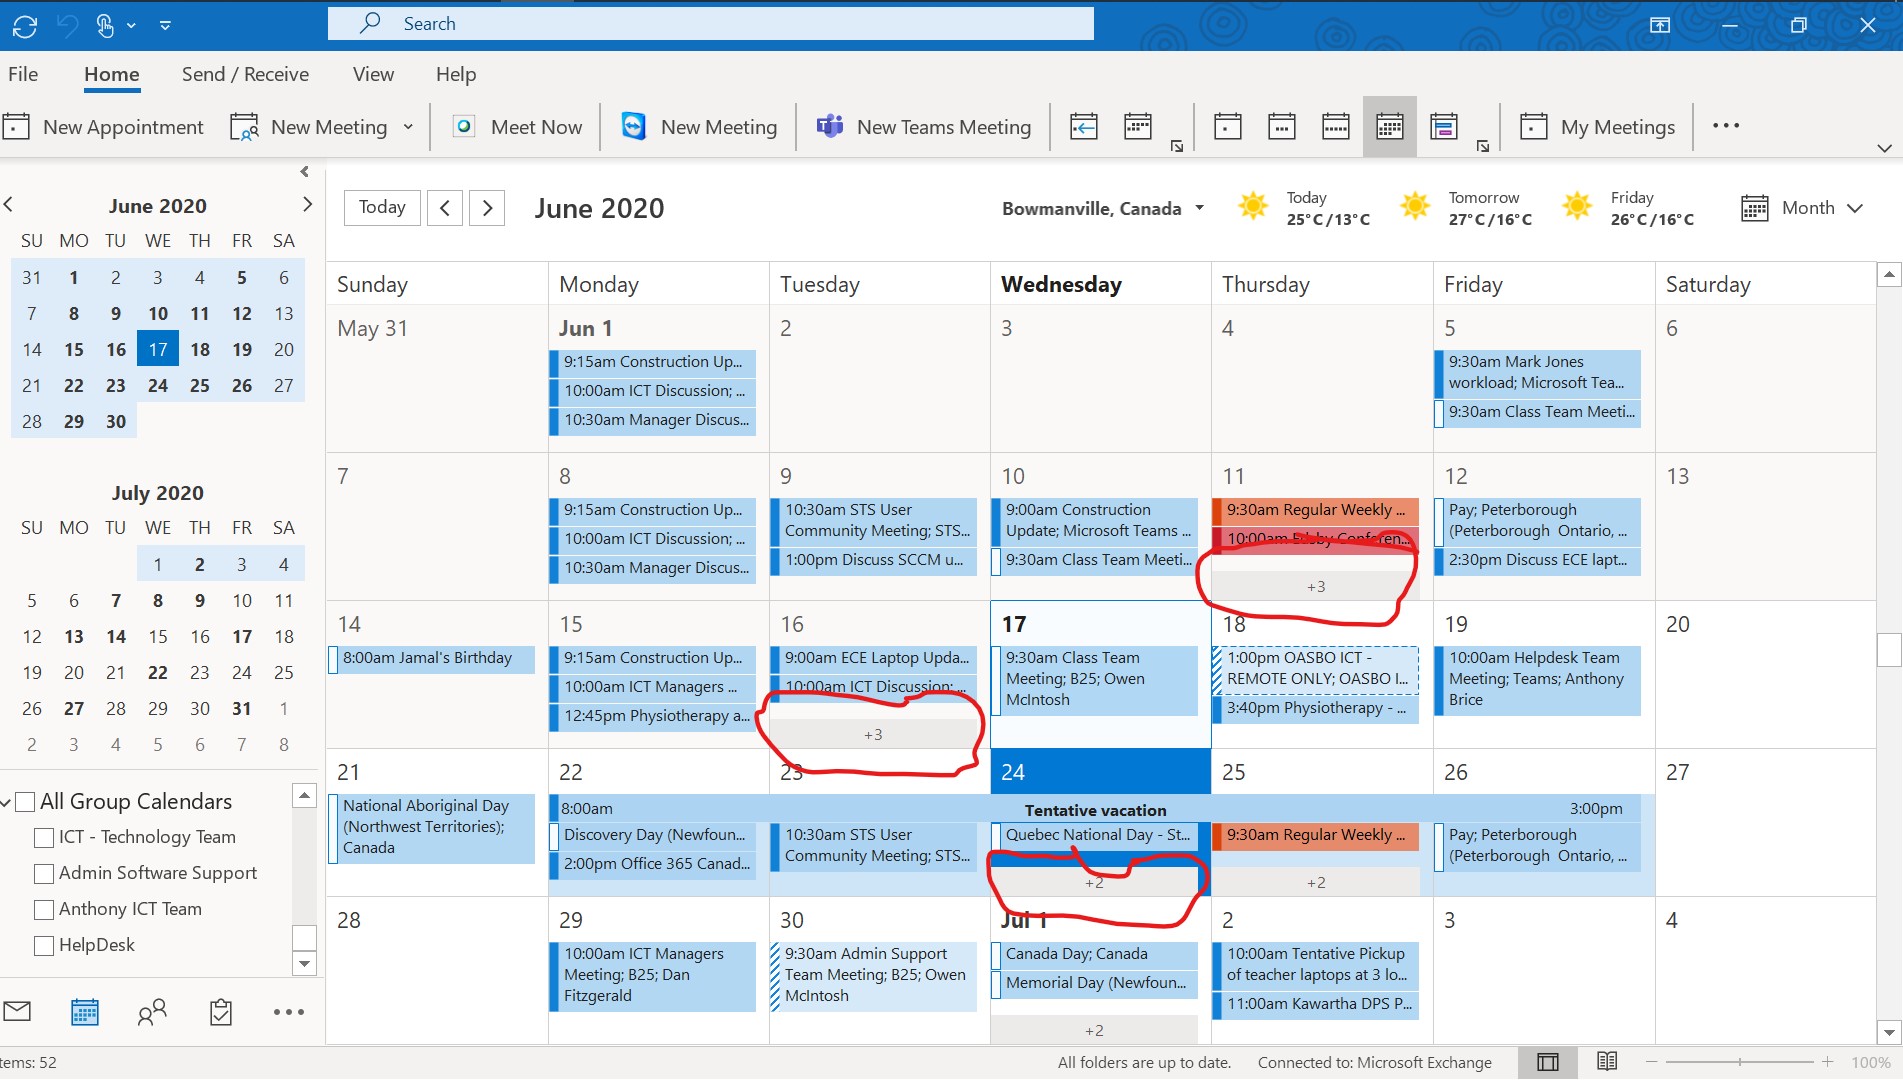 Show all calendar events in Month View; Don't hide them once